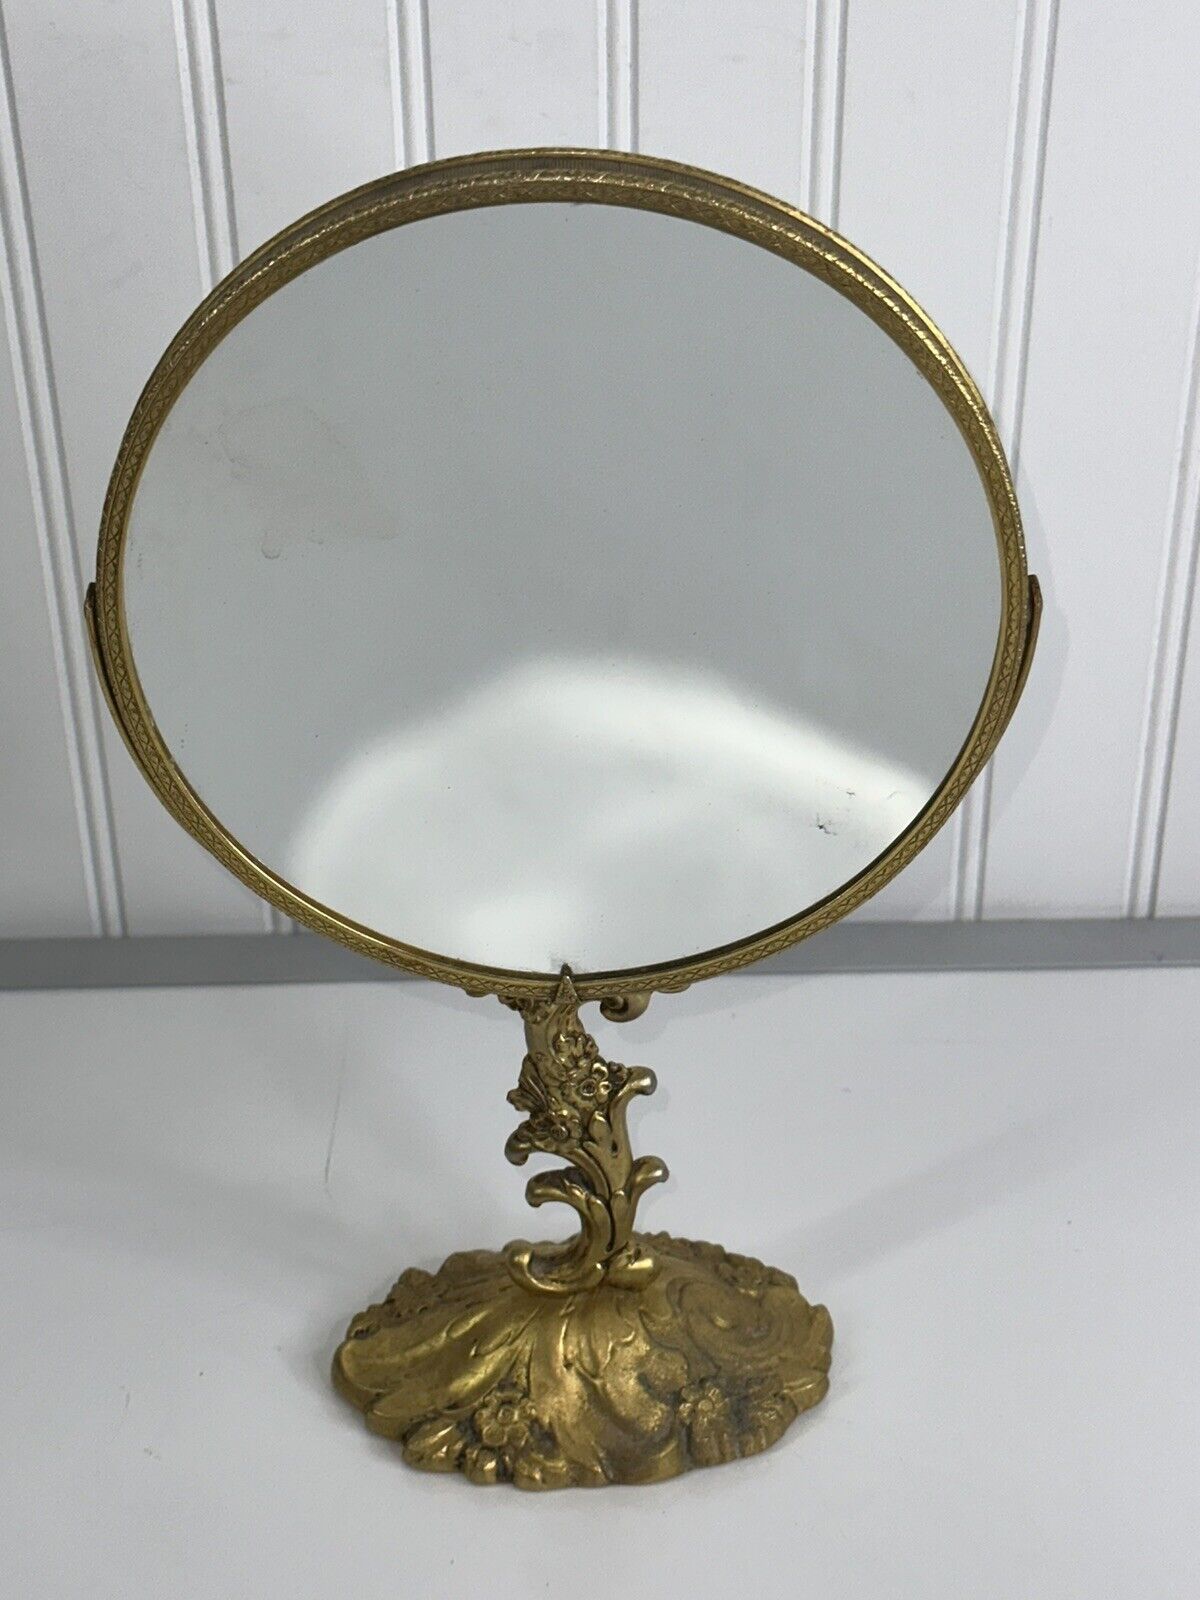 Beautiful Vintage Double Sided Golden Vanity Mirror Excellent Condition